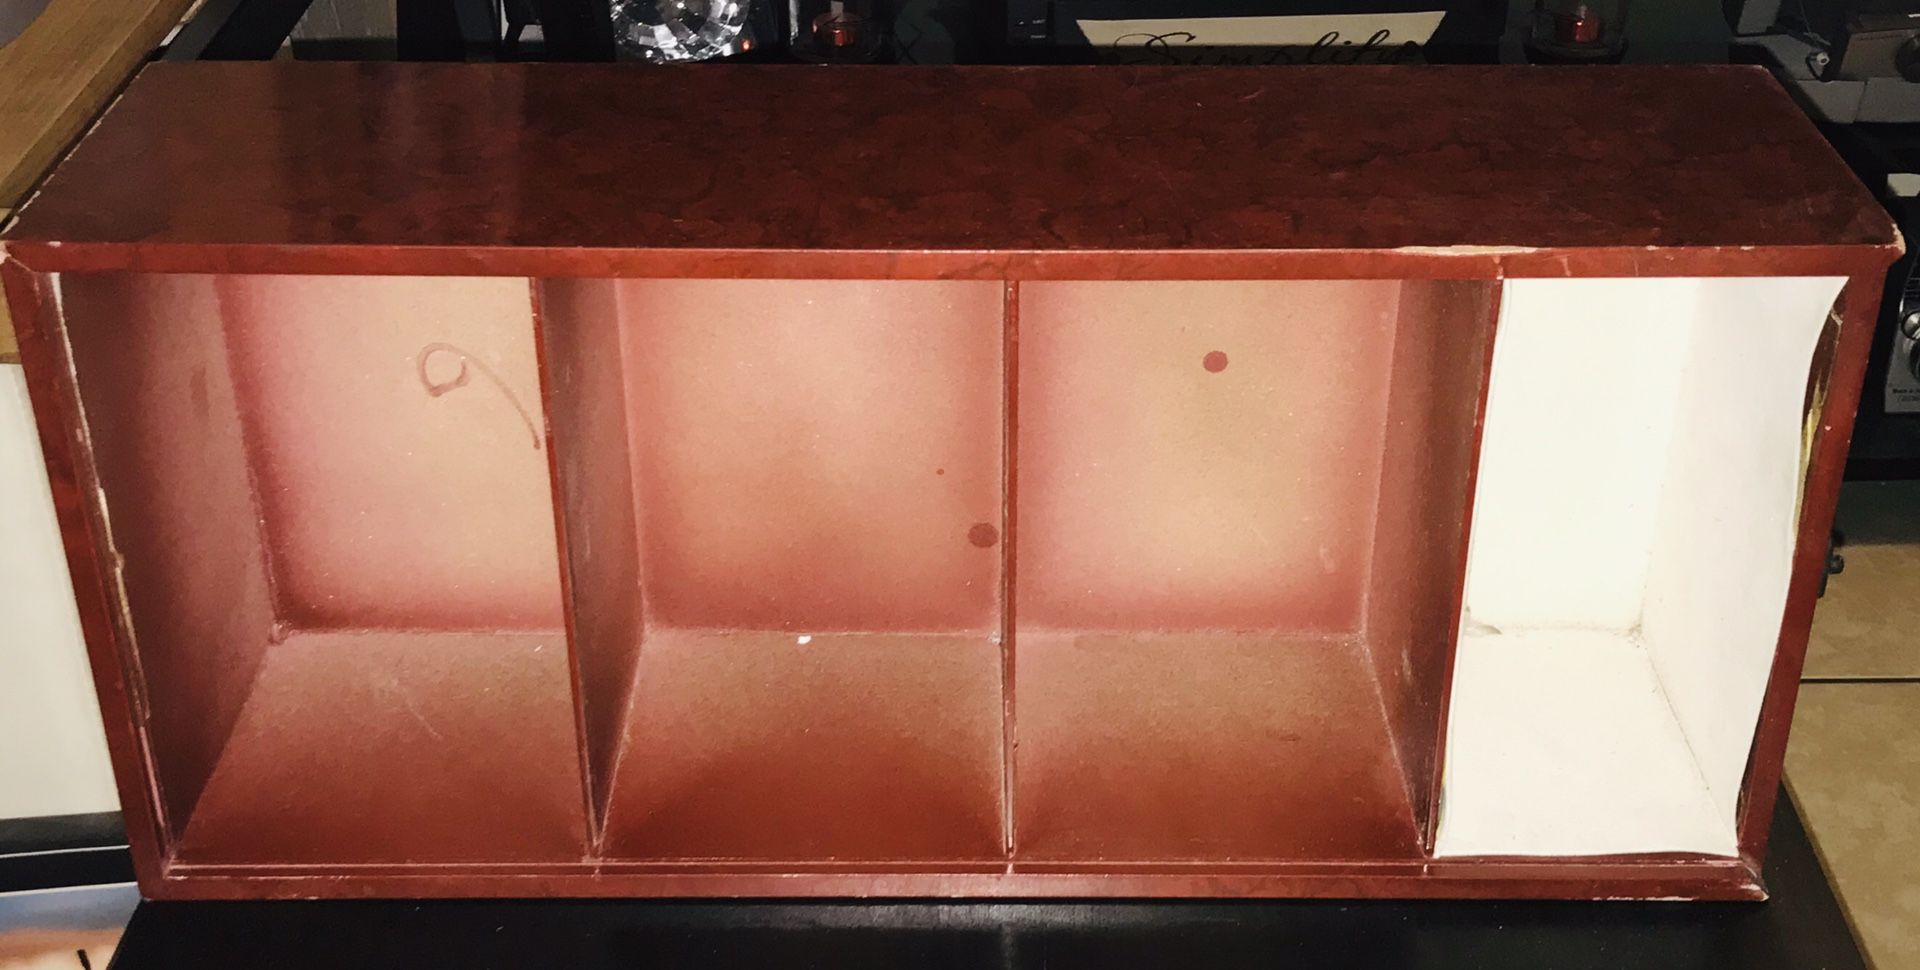 26x12x26 This is a small cherry wood shelf with 4 shelves it’s got normal wear but perfect for small area organization. Located off lake mead and jon